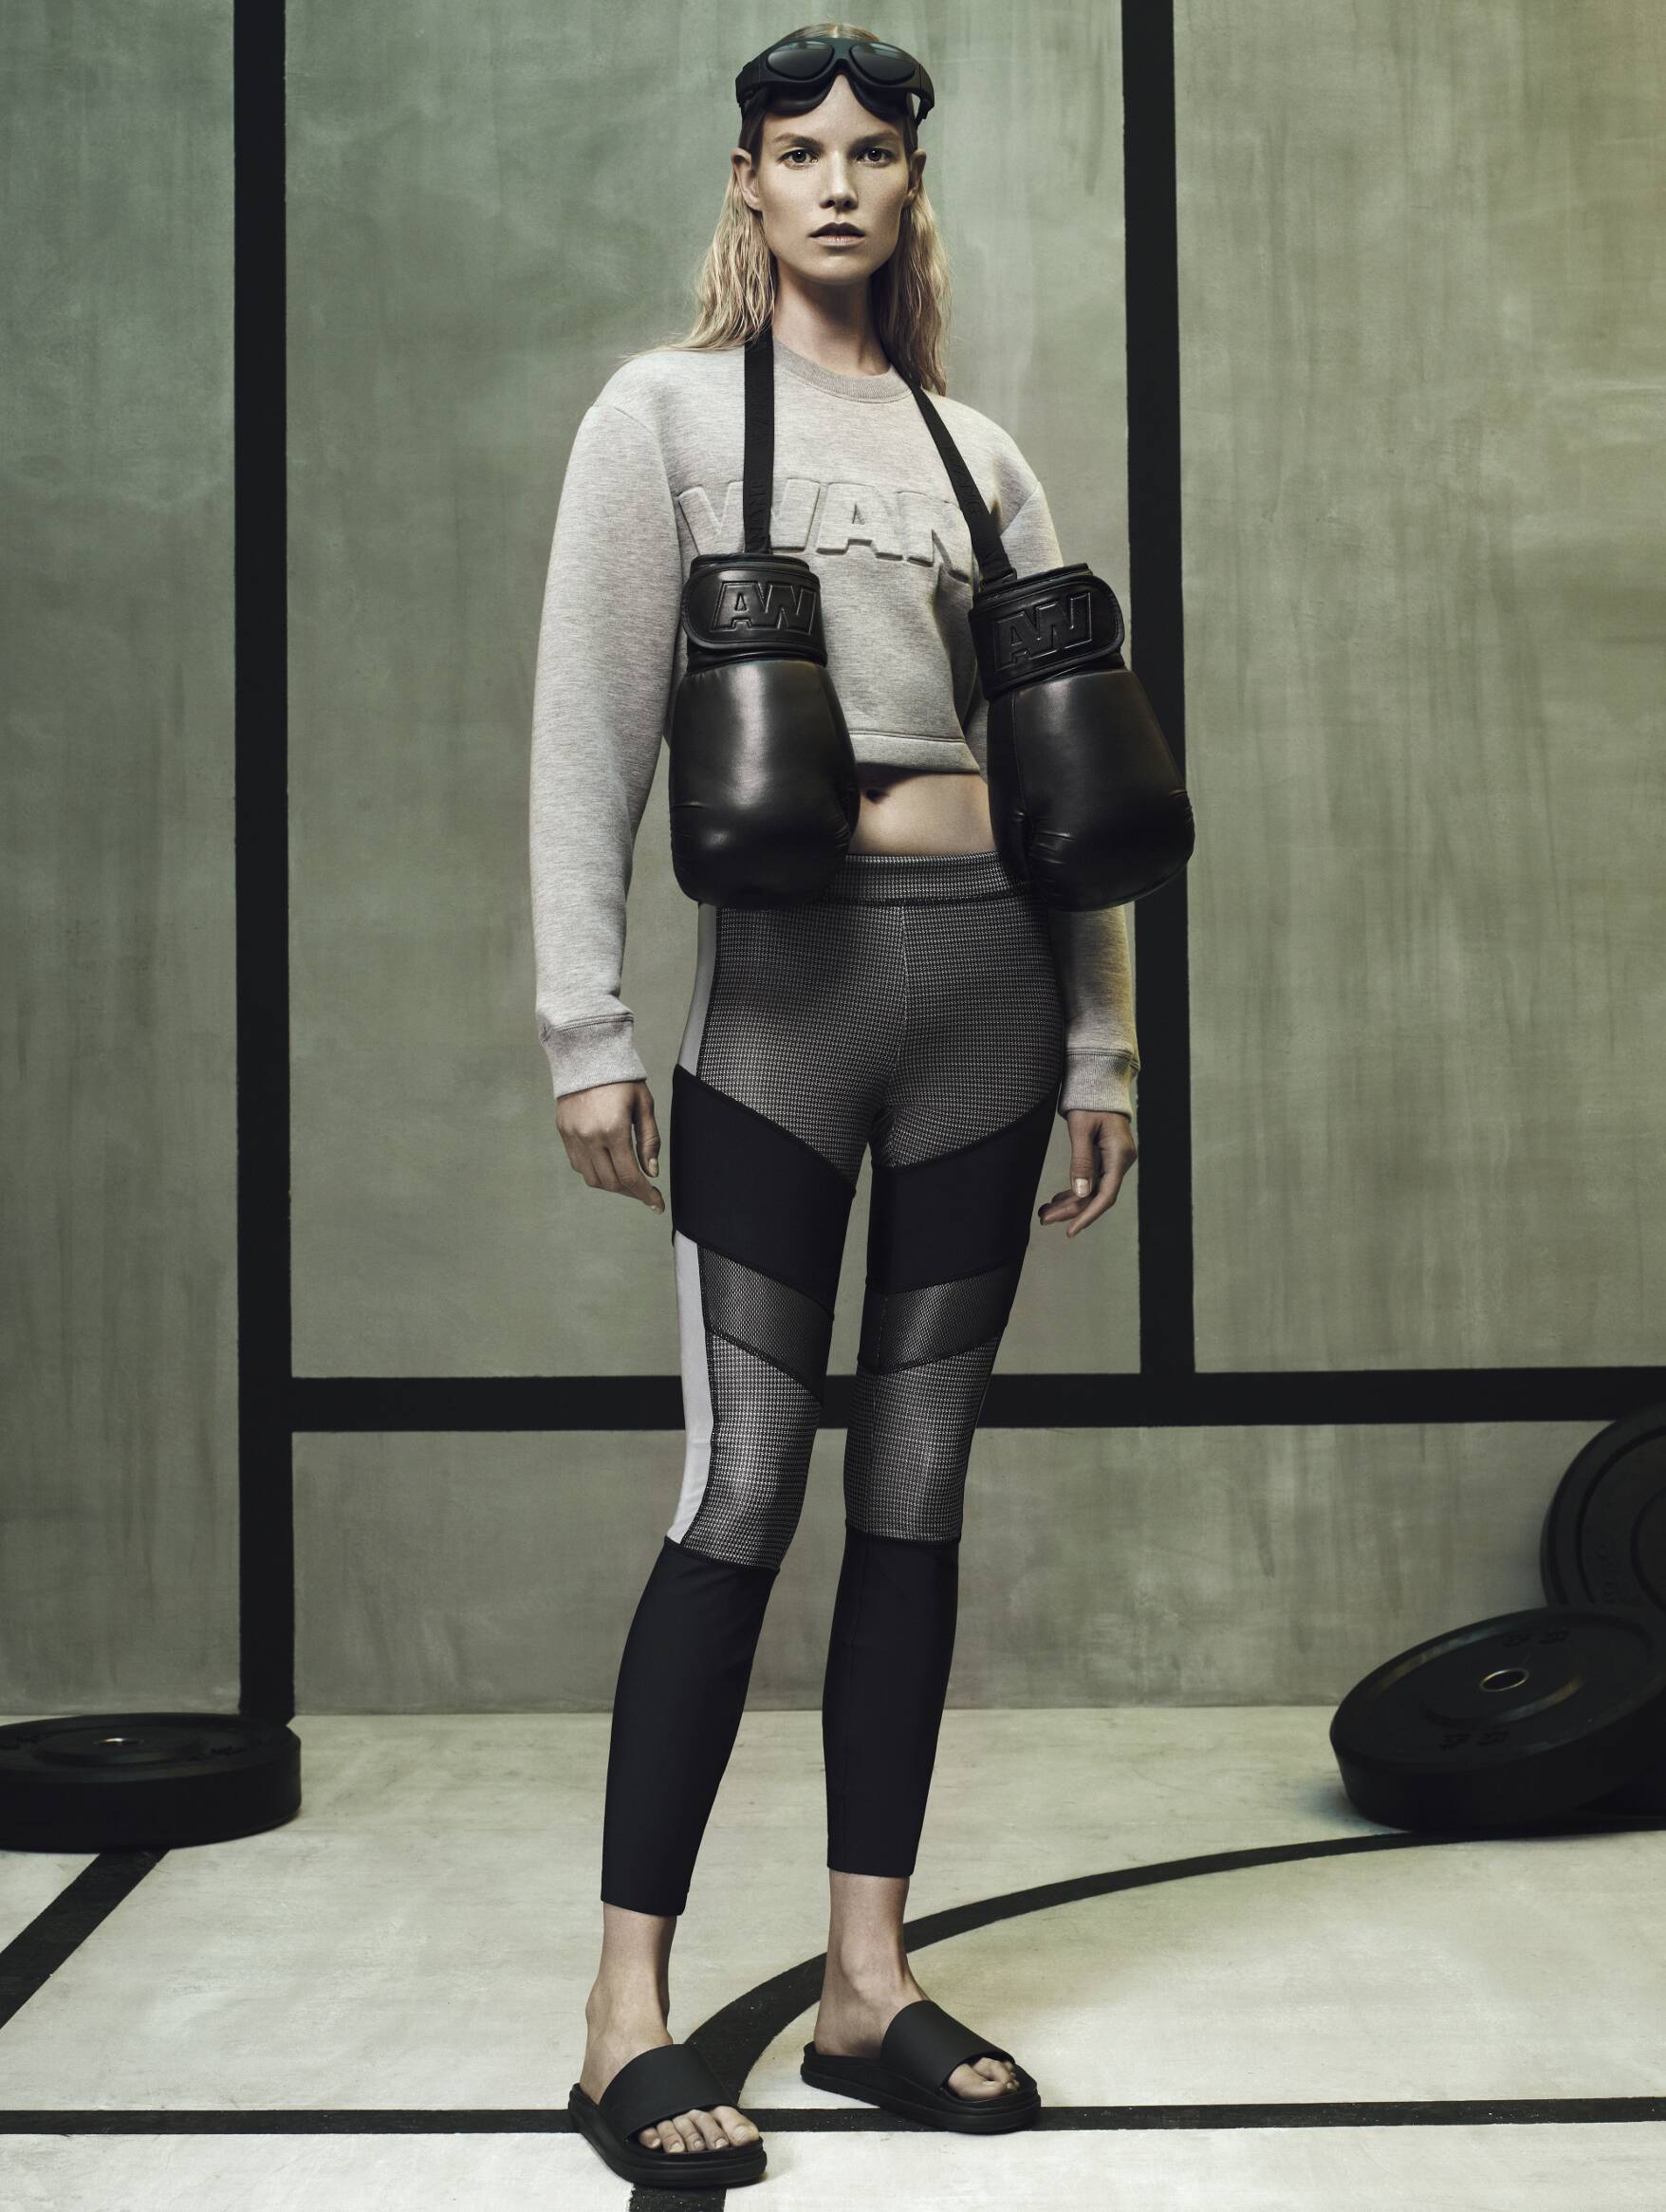 ALEXANDER WANG FOR H&M:WOMEN'S AND MEN'S COLLECTION | The Skinny Beep